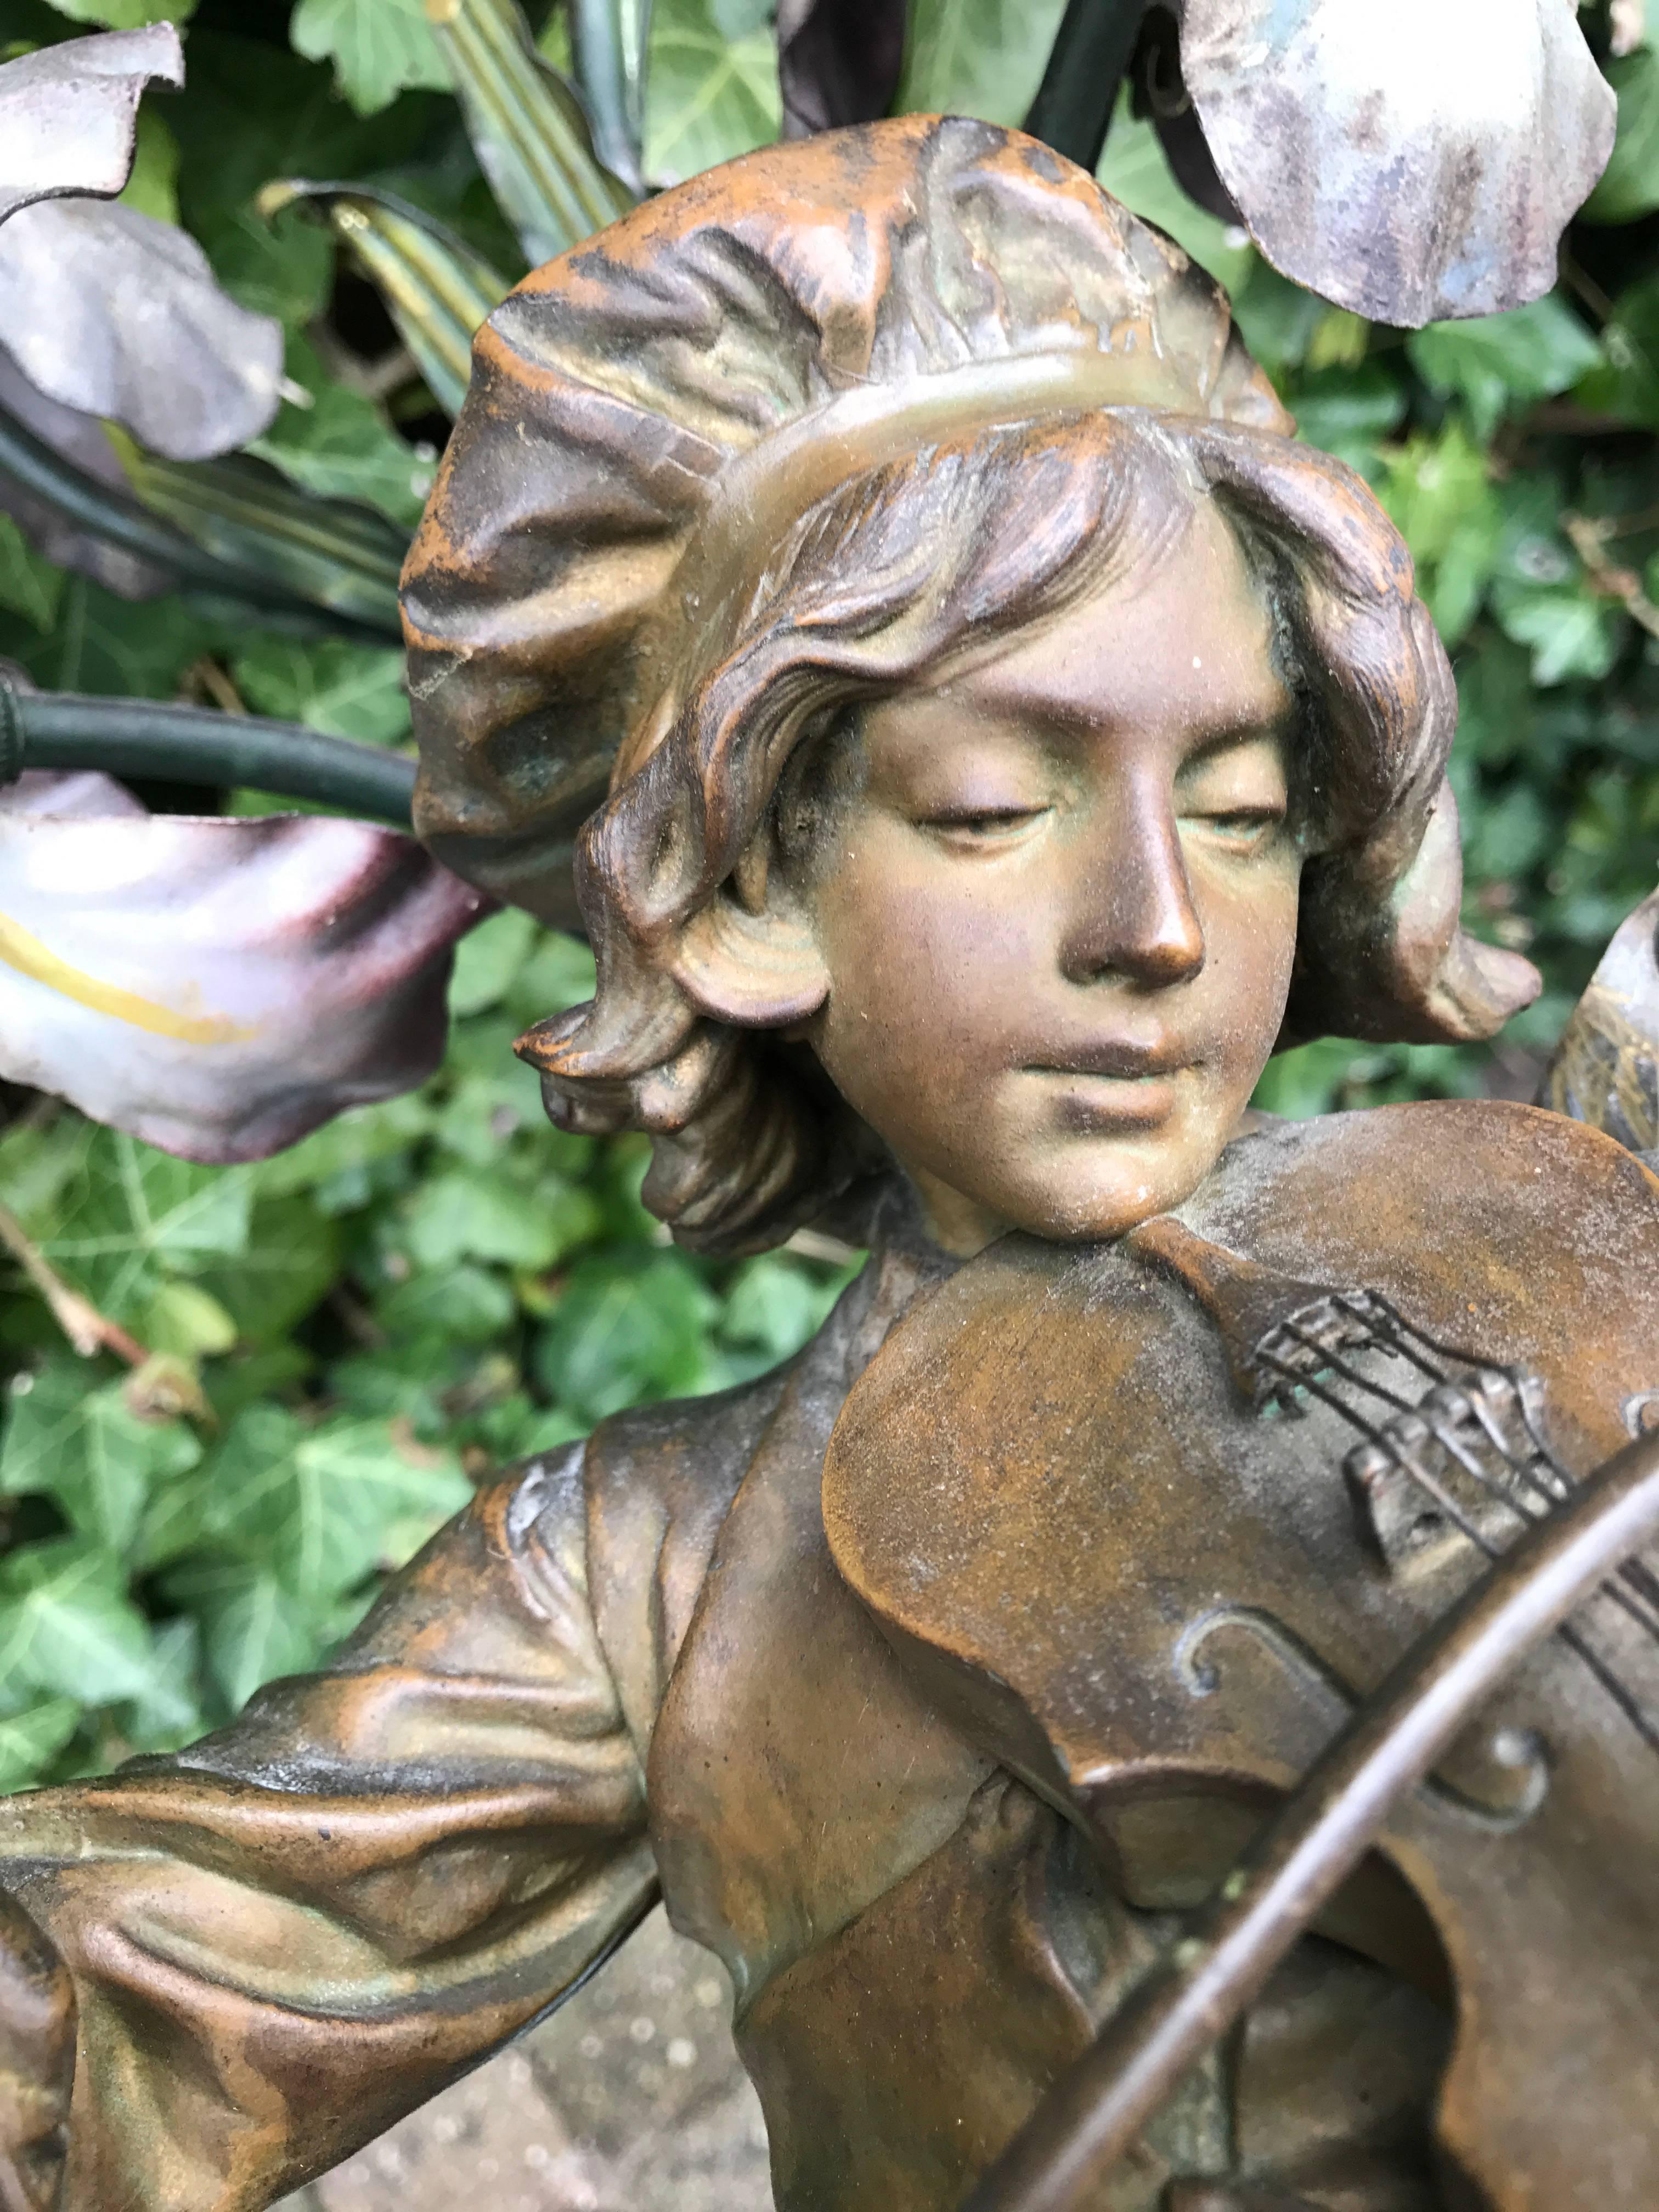 Lovely four-light table lamp with musical theme.

This antique and sculptural French lamp features a boy who is tuning his violin in a floral setting. The natural and realistic poisture of this focused boy shows the craftsmanship of the maker.